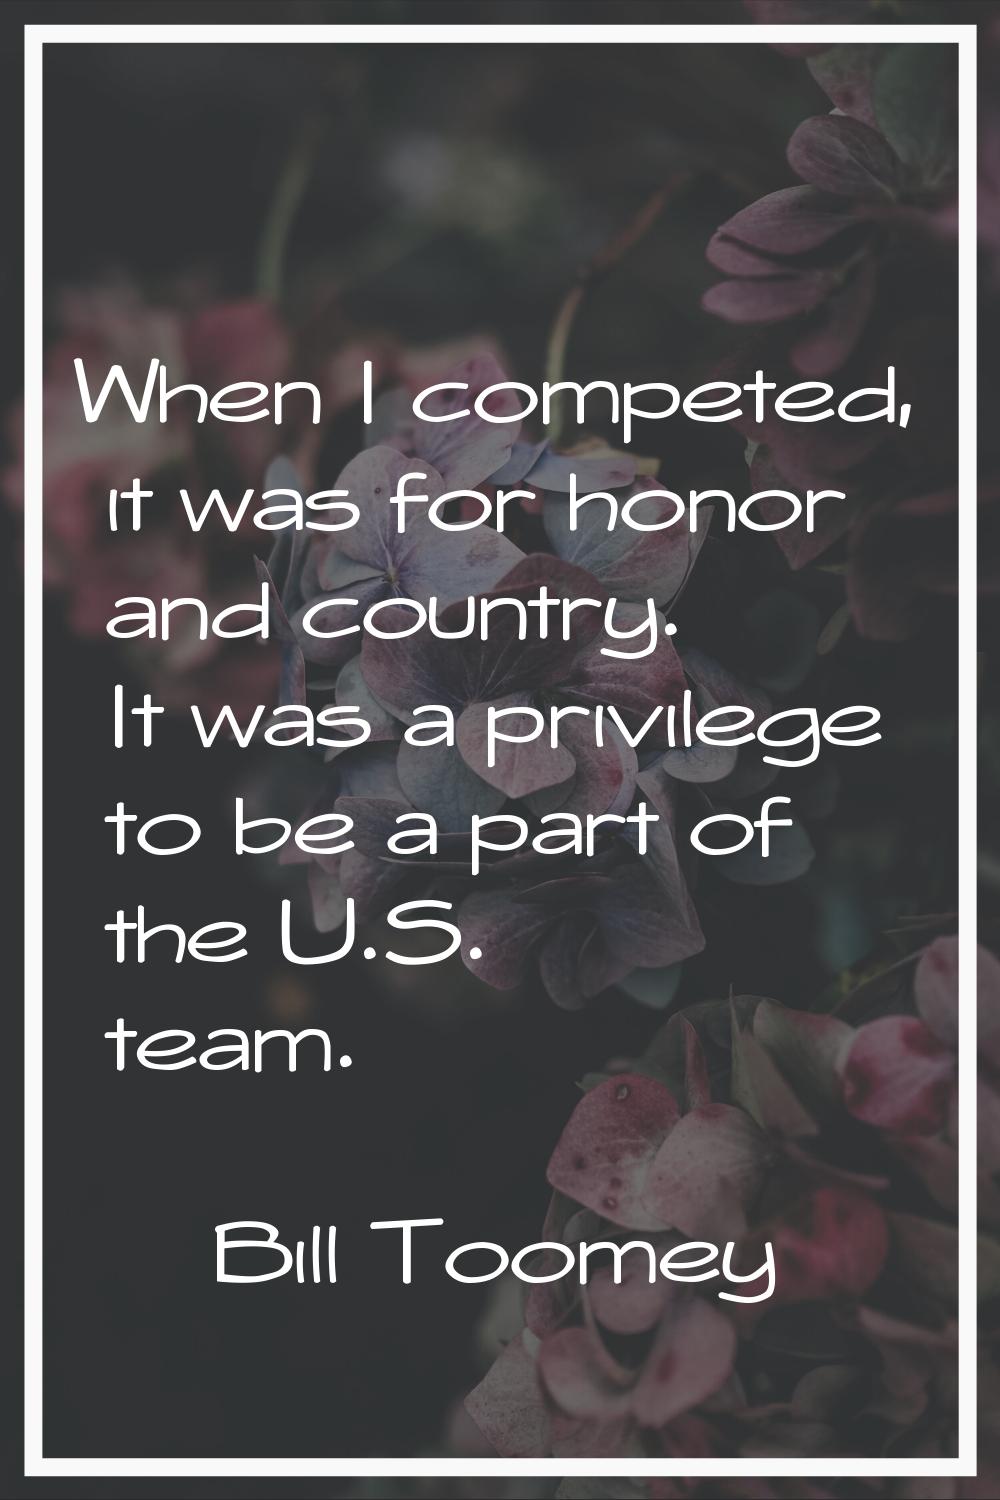 When I competed, it was for honor and country. It was a privilege to be a part of the U.S. team.